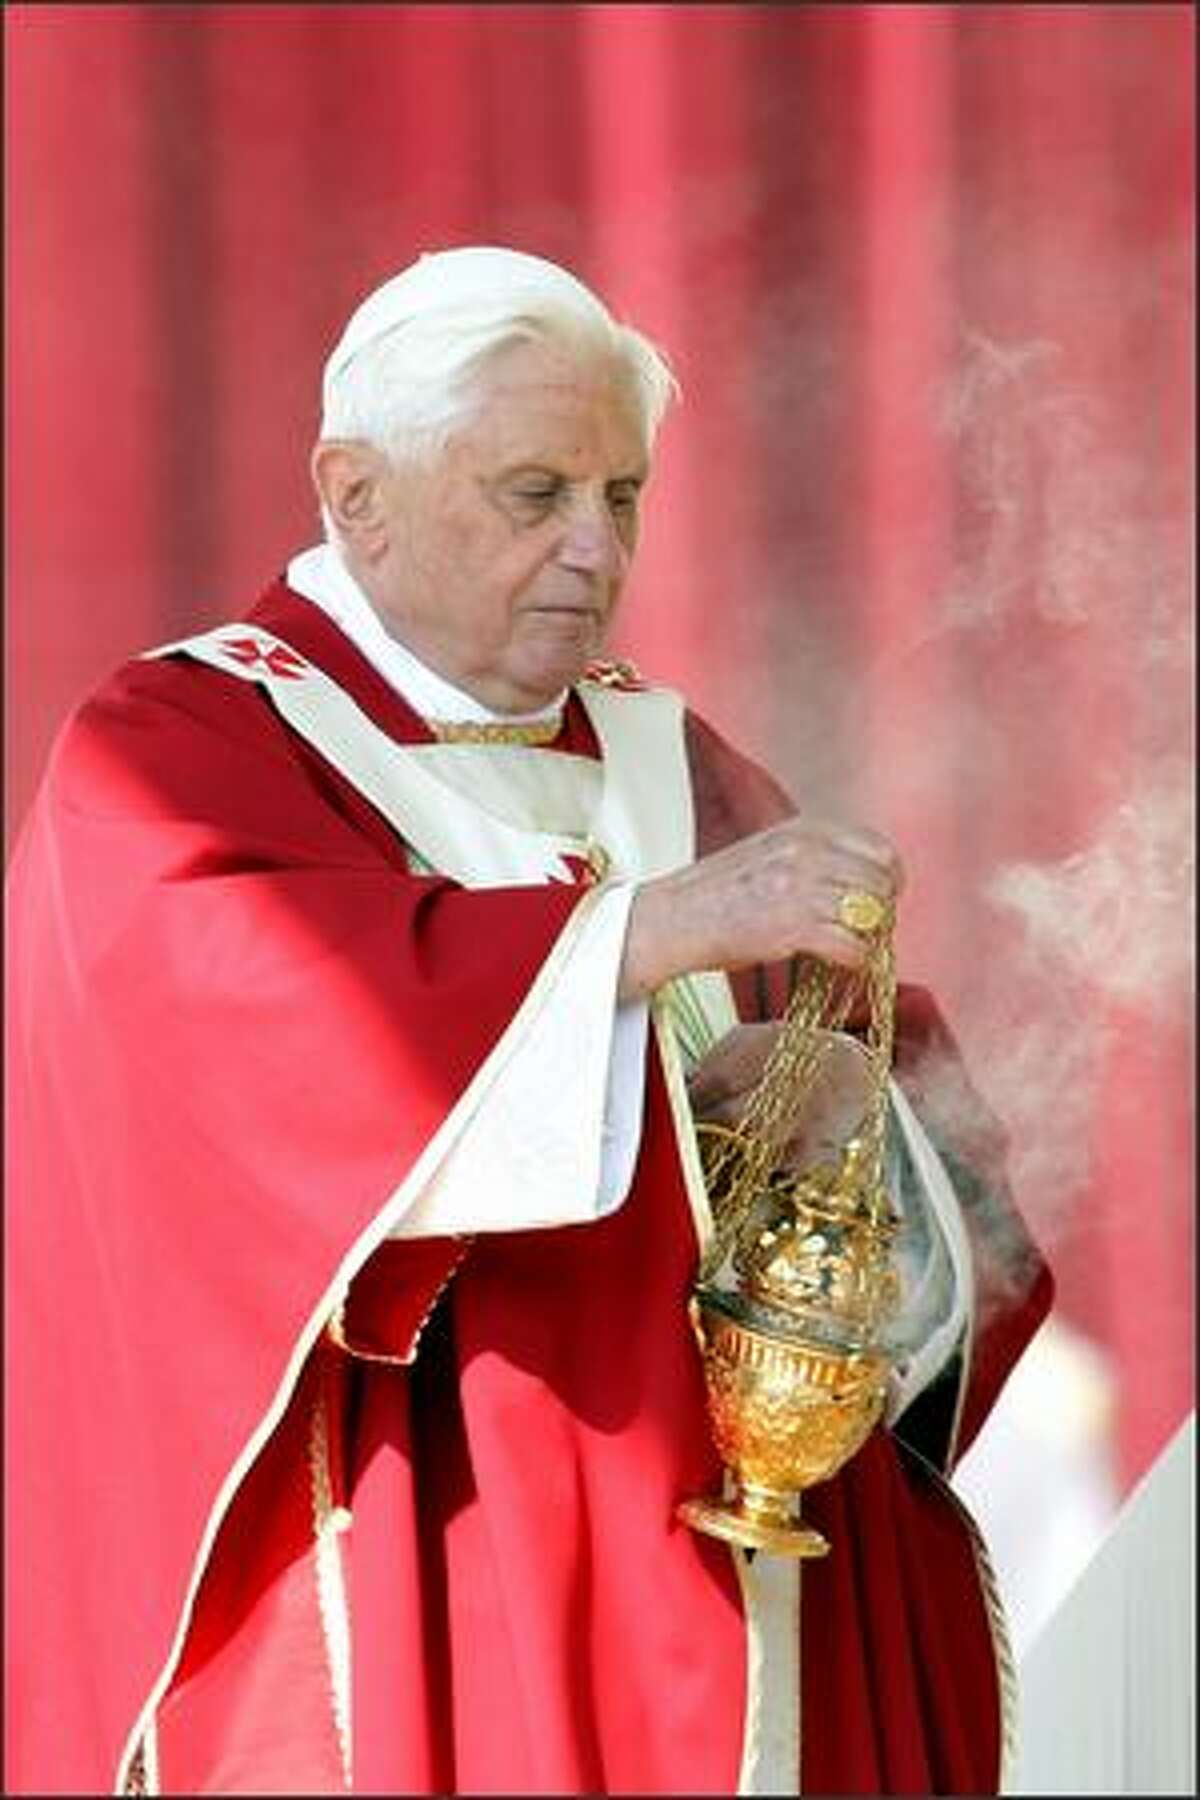 Pope Benedict XVI attends the Palm Sunday service in Saint Peter's Square on April 5, 2009 in Vatican City, Vatican.